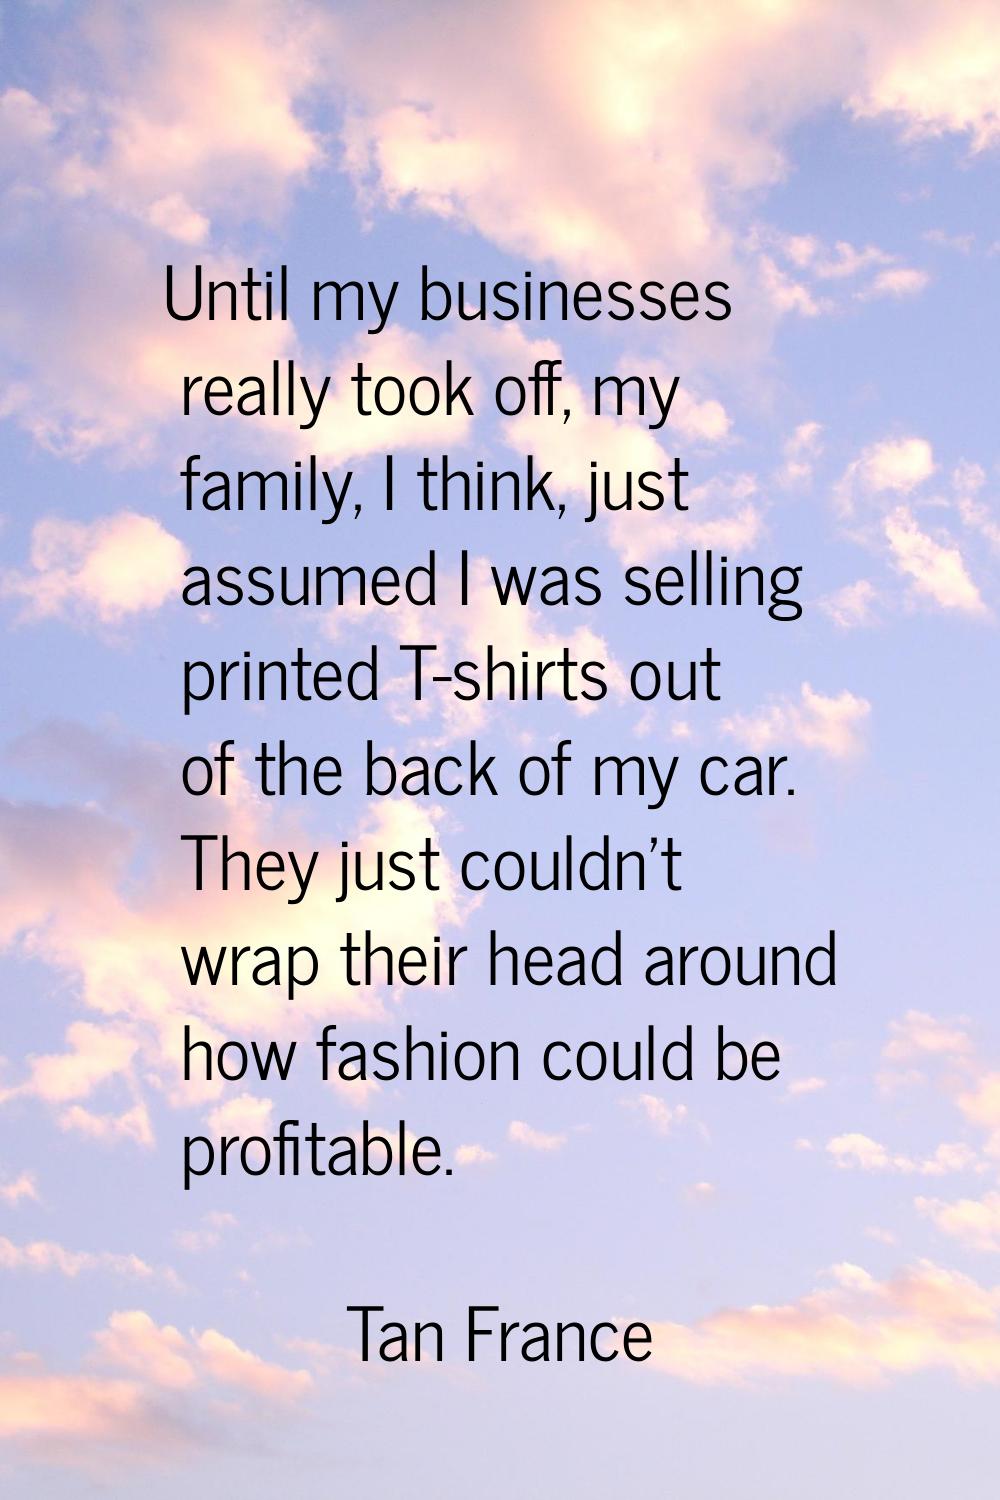 Until my businesses really took off, my family, I think, just assumed I was selling printed T-shirt